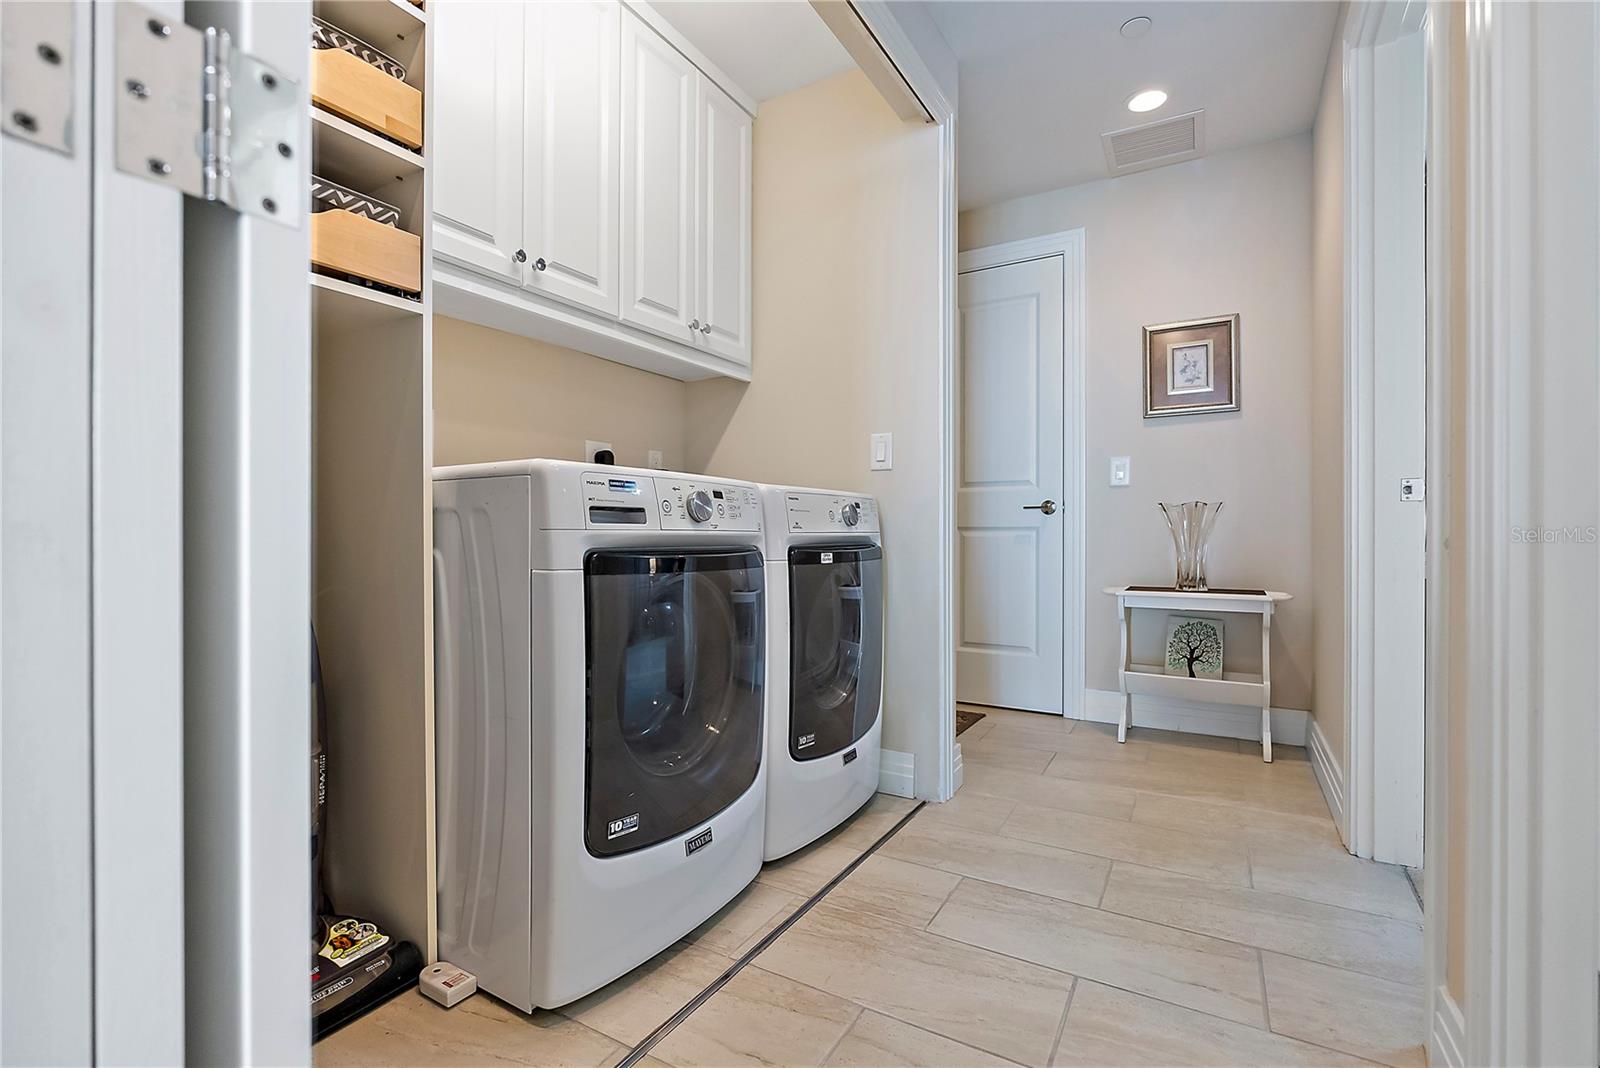 Laundry Alcove with deep cabinets and custom shelving for functionality.